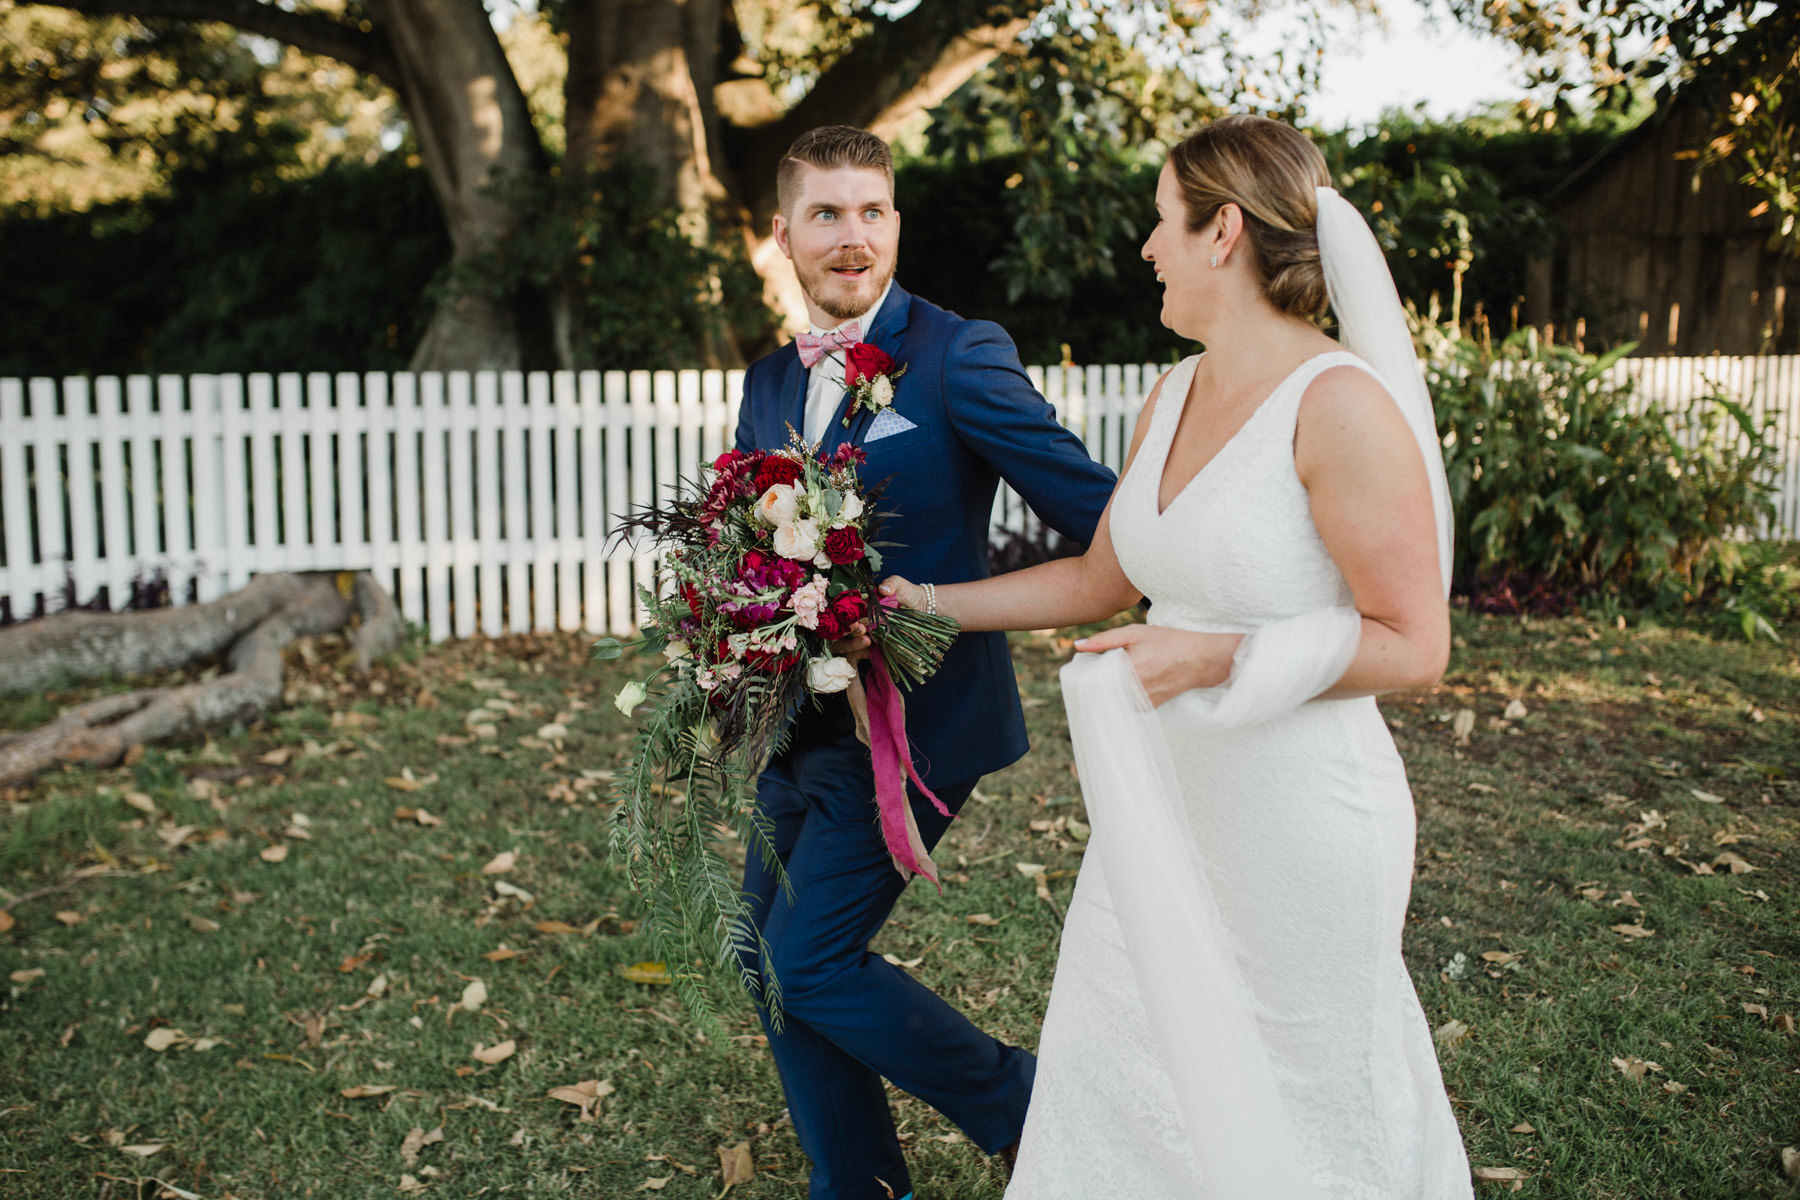 086Hunter Valley Wedding Photographers Bryce Noone Photography at Tocal Homestead Wedding Venue.jpg